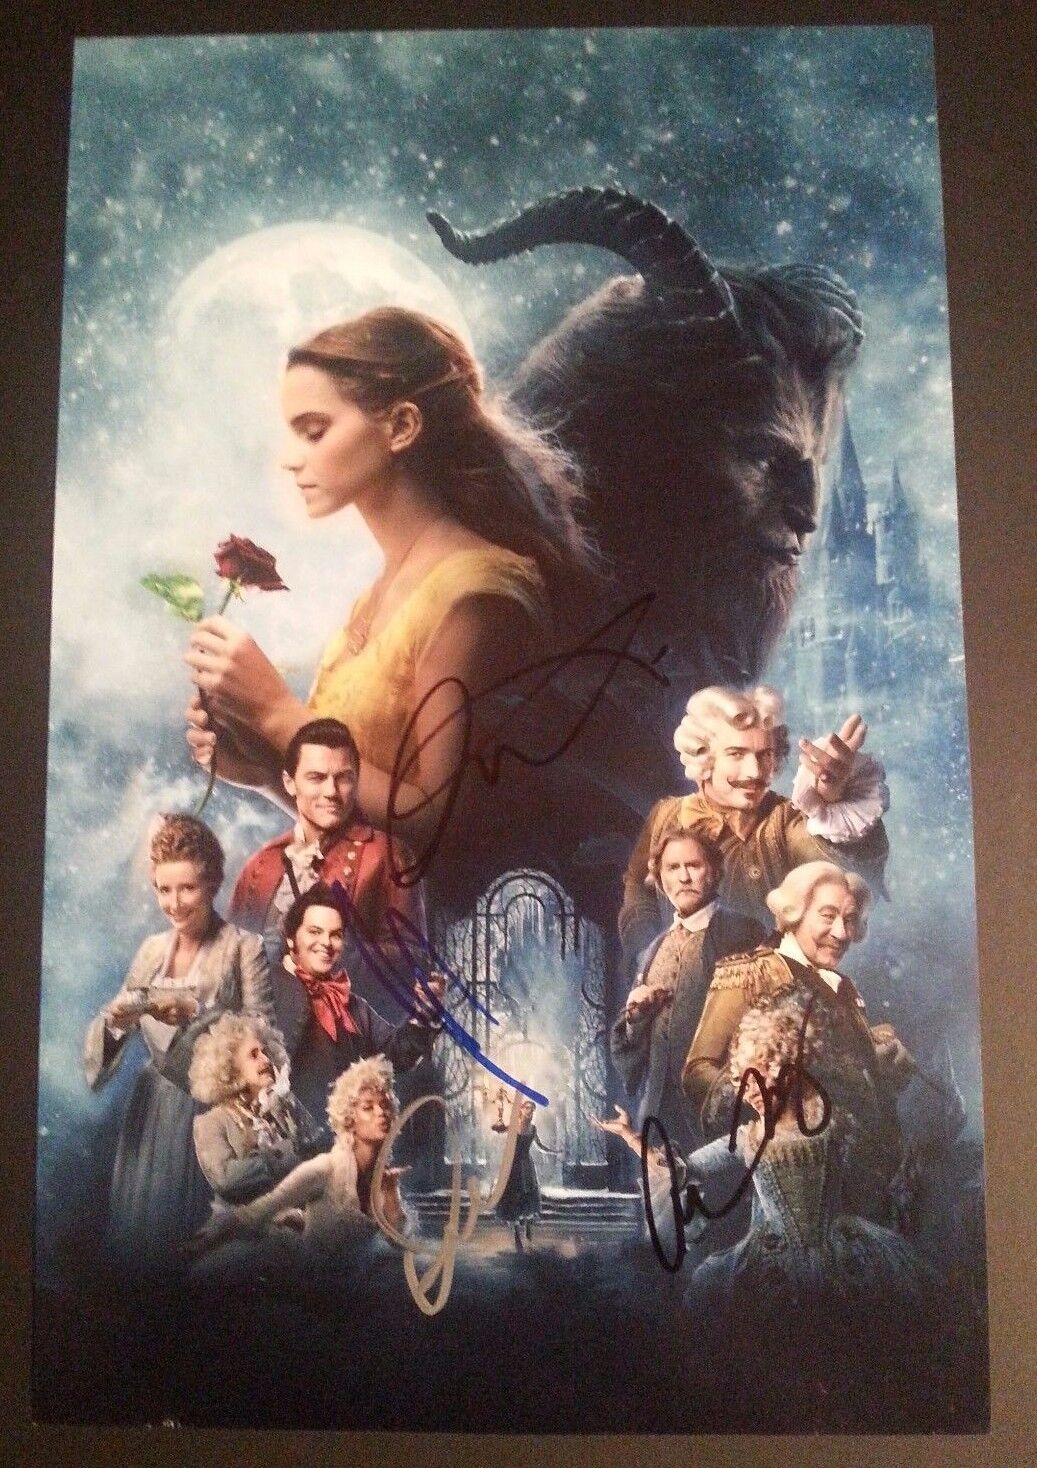 BEAUTY AND THE BEAST Cast(x4) Authentic Signed EMMA WATSON 11x17 Photo Poster painting (PROOF)